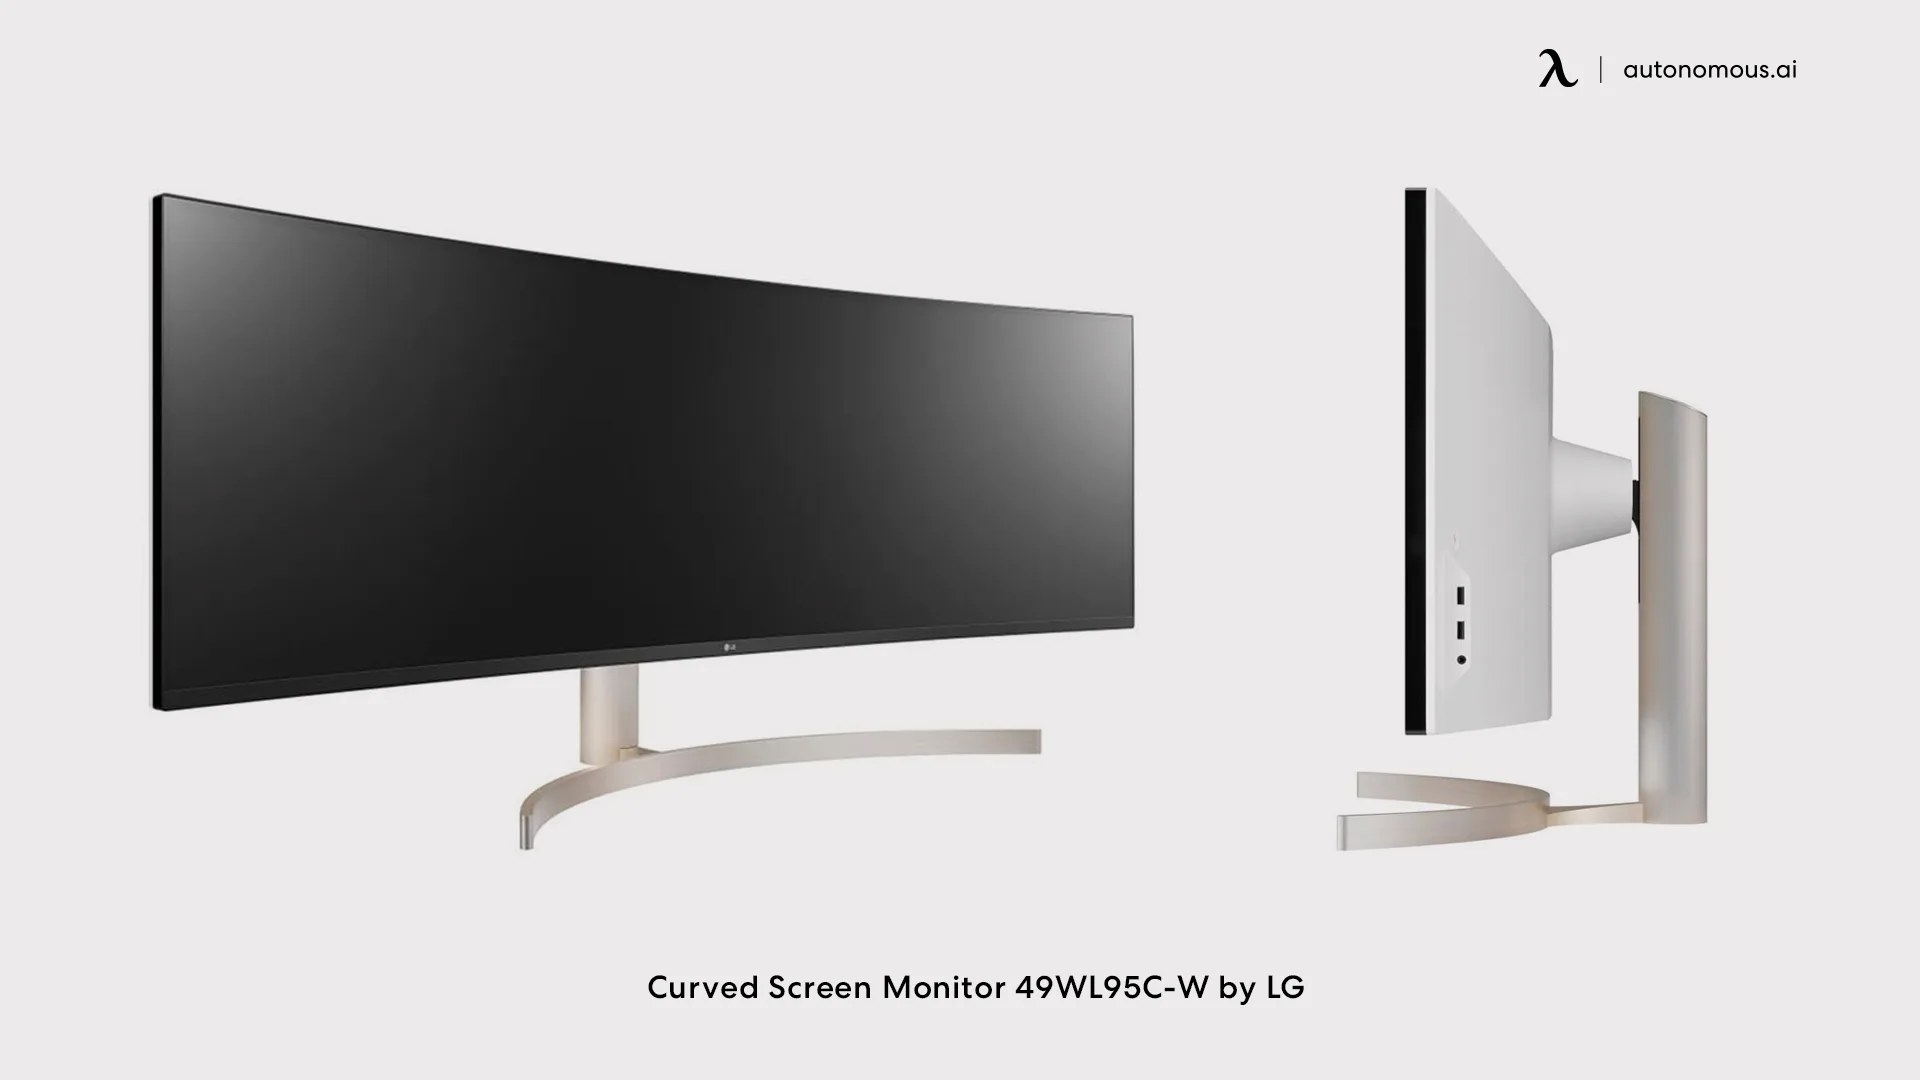 Curved Screen Monitor 49WL95C-W by LG